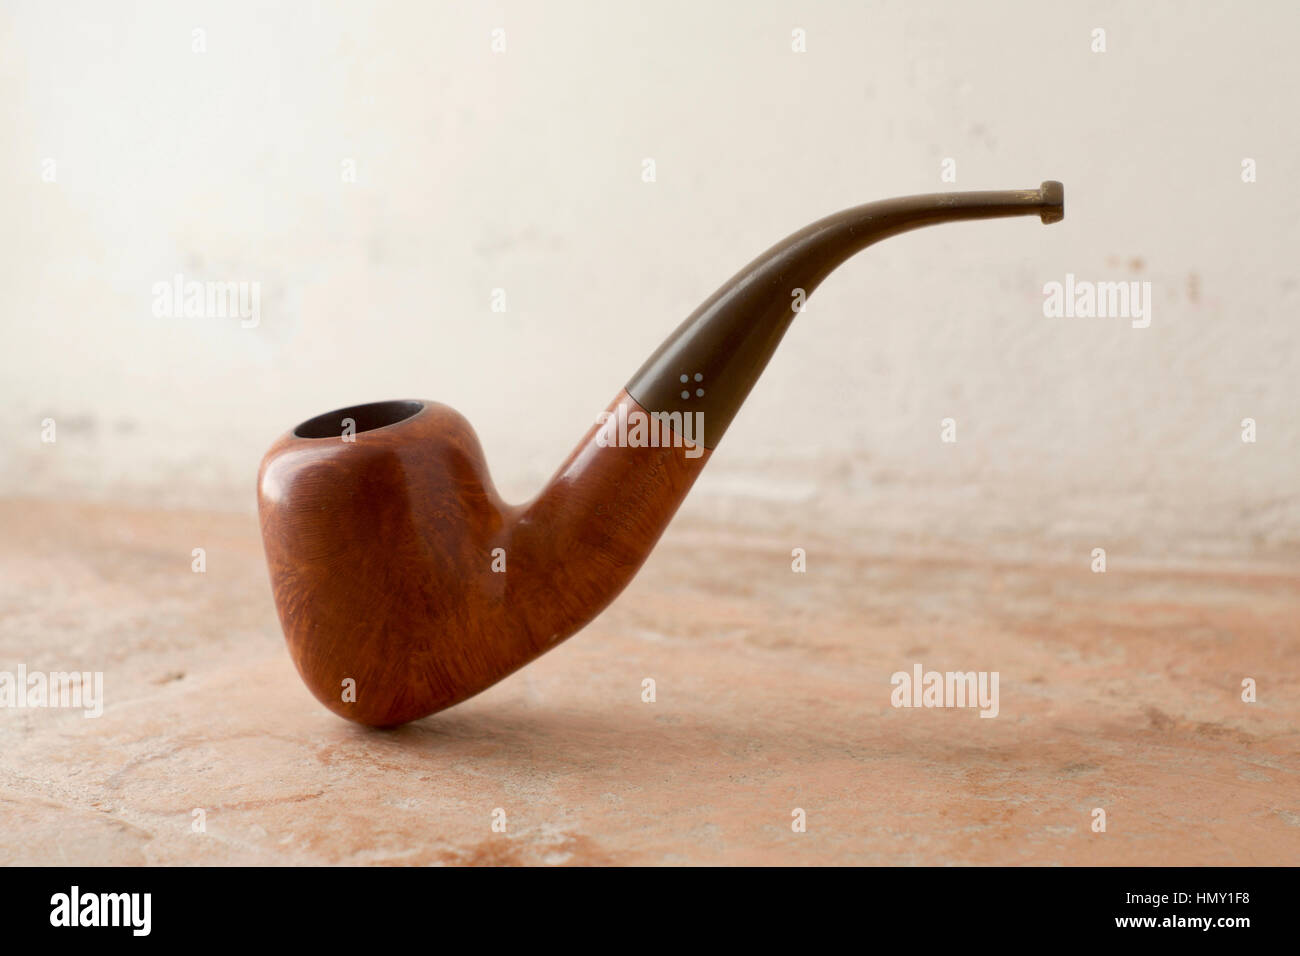 A wooden smoking pipe Stock Photo